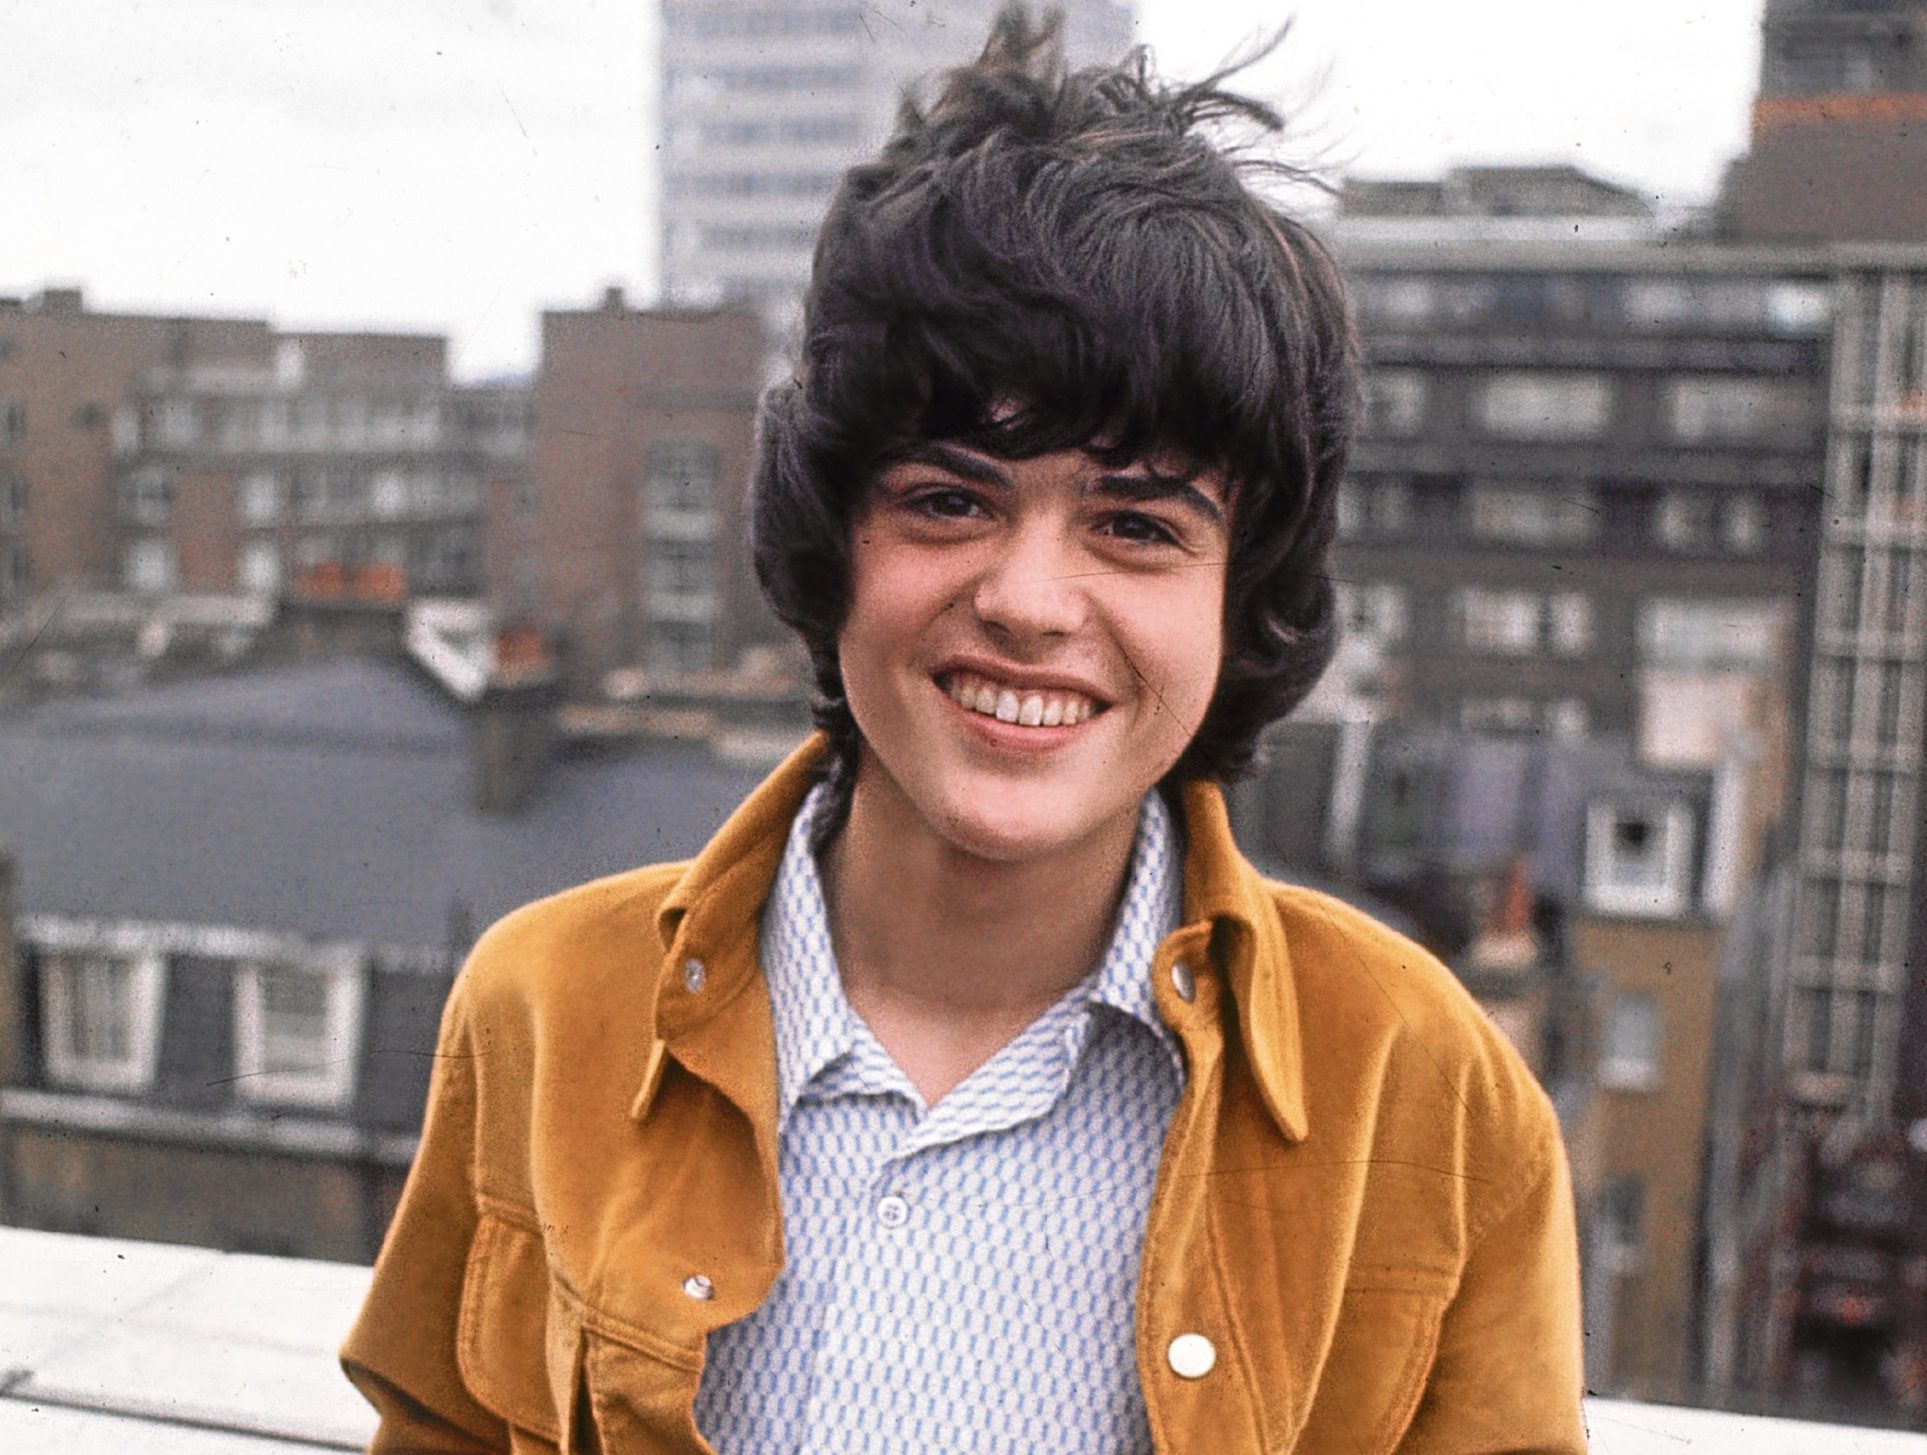 Donny Osmond circa 1972 (Photo by Hulton Archive/Getty Images)